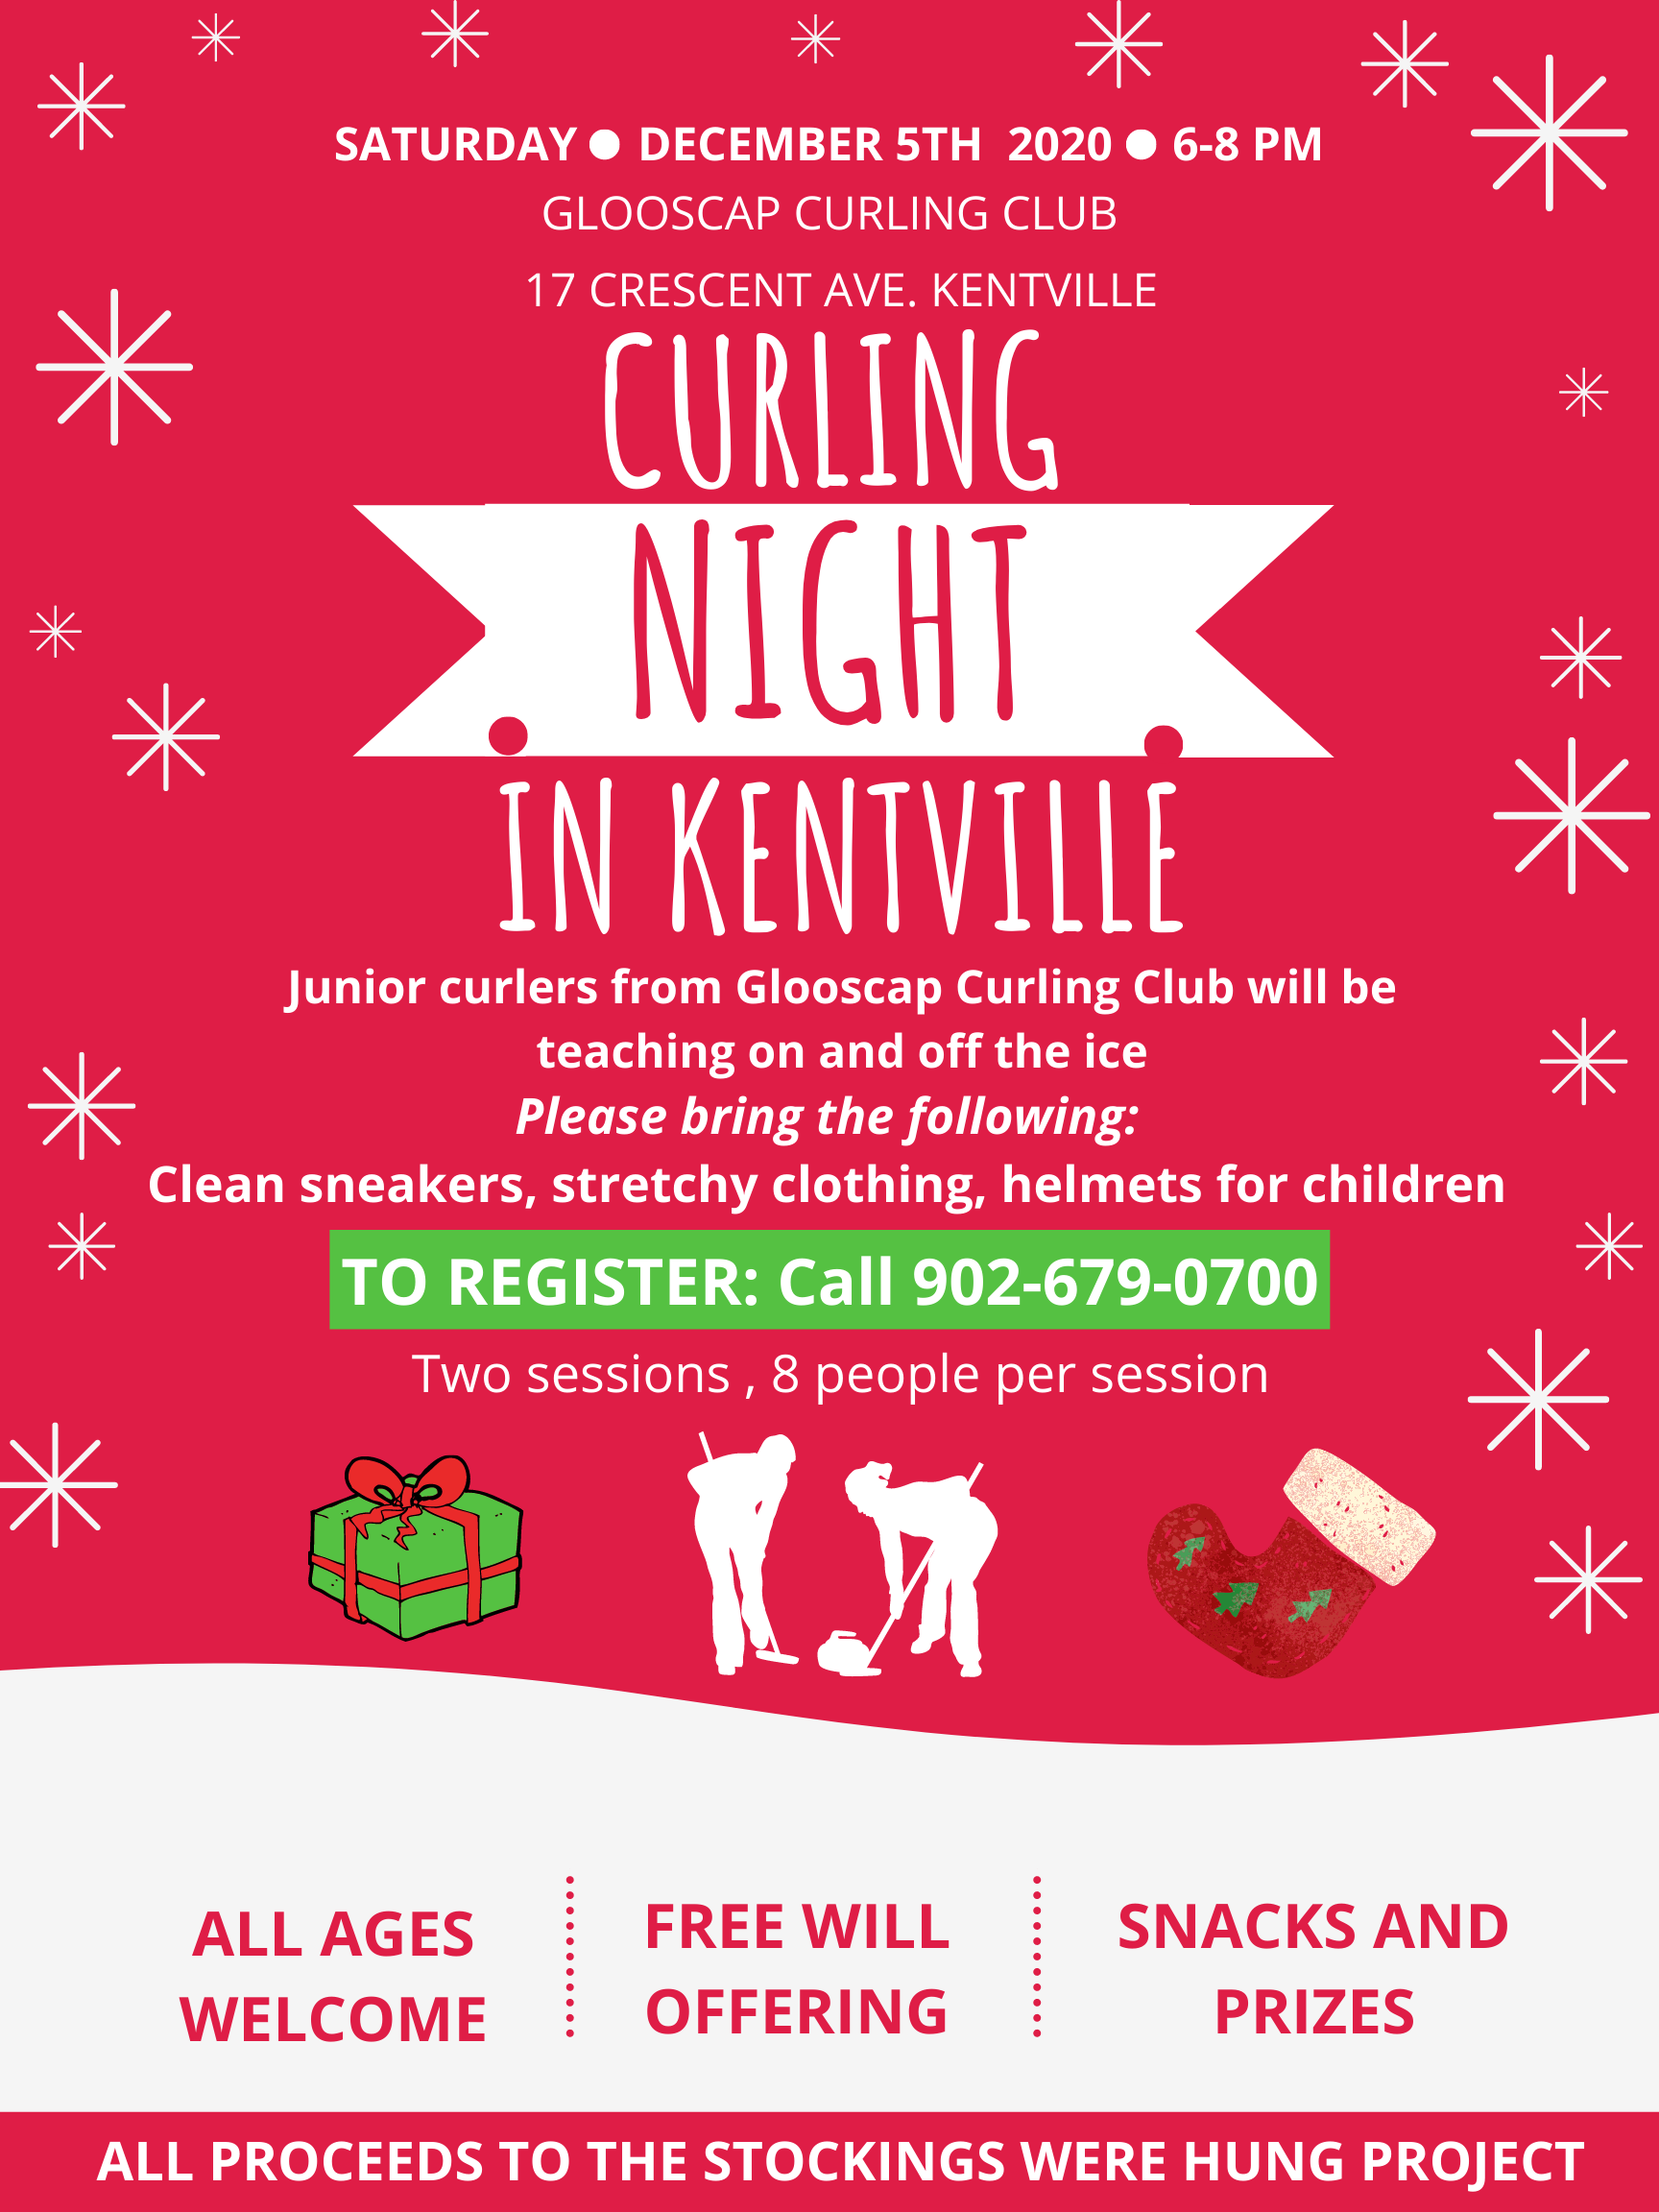 Stockings were hung curling event poster